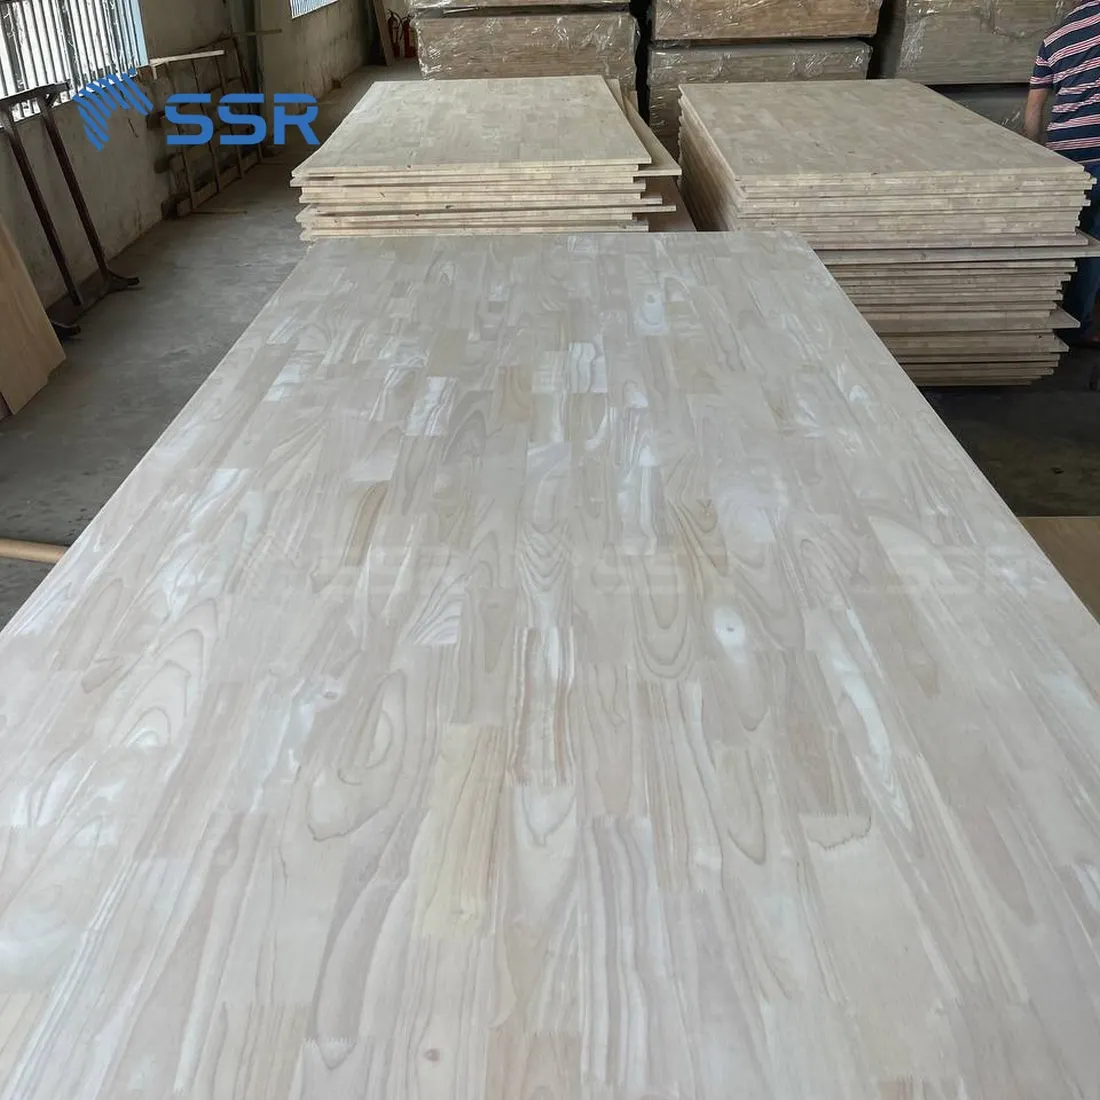 SSR VINA - Rubber Wood Finger Joint Board - 4x8 feet discontinuous staves wood panel rubberwood finger jointed boards